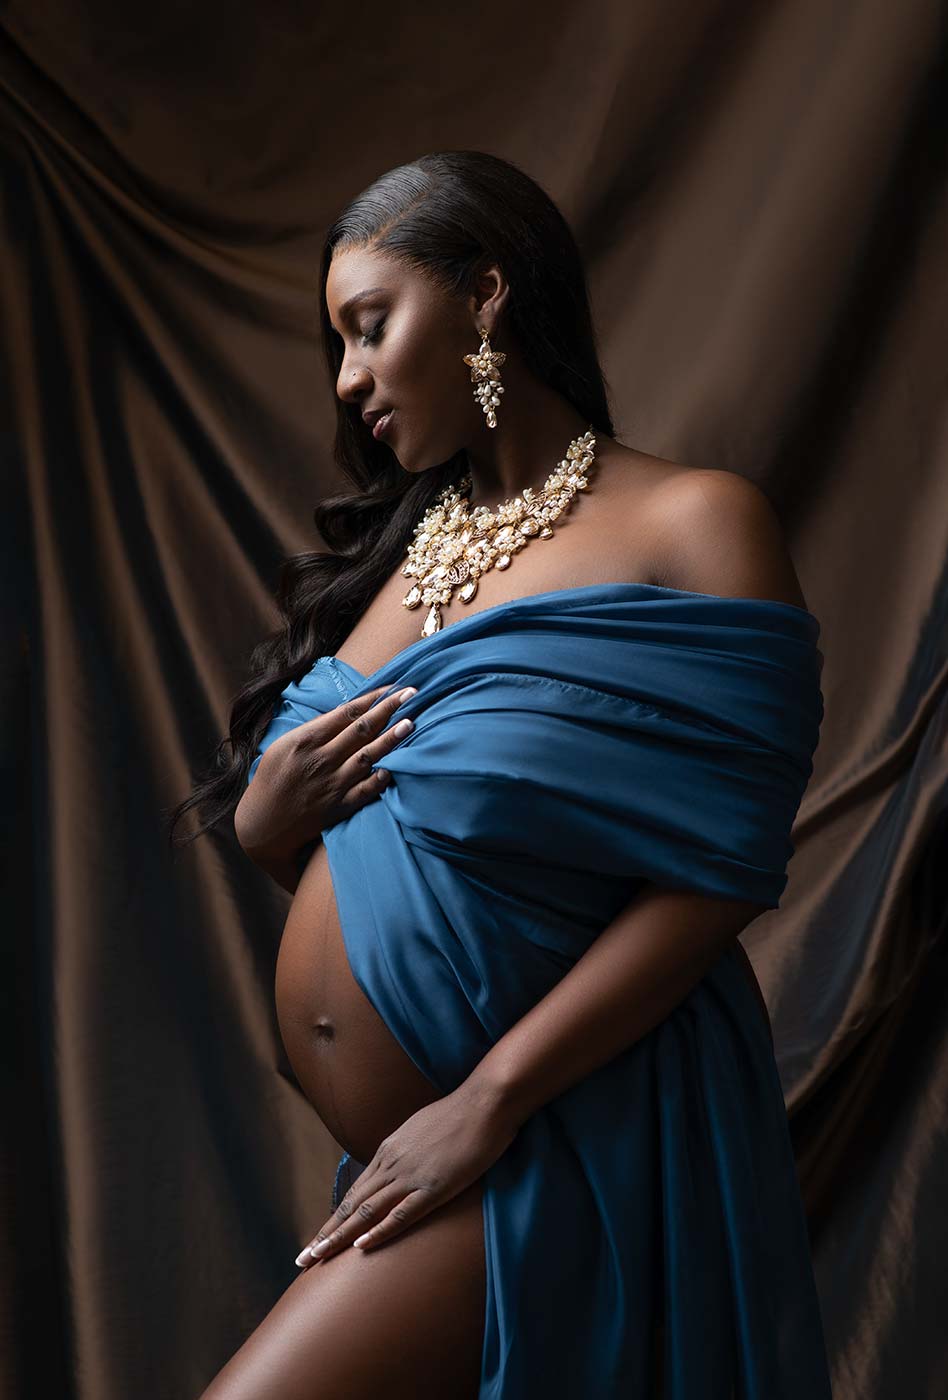 Maternity portrait as photographed by a NYC photo studio